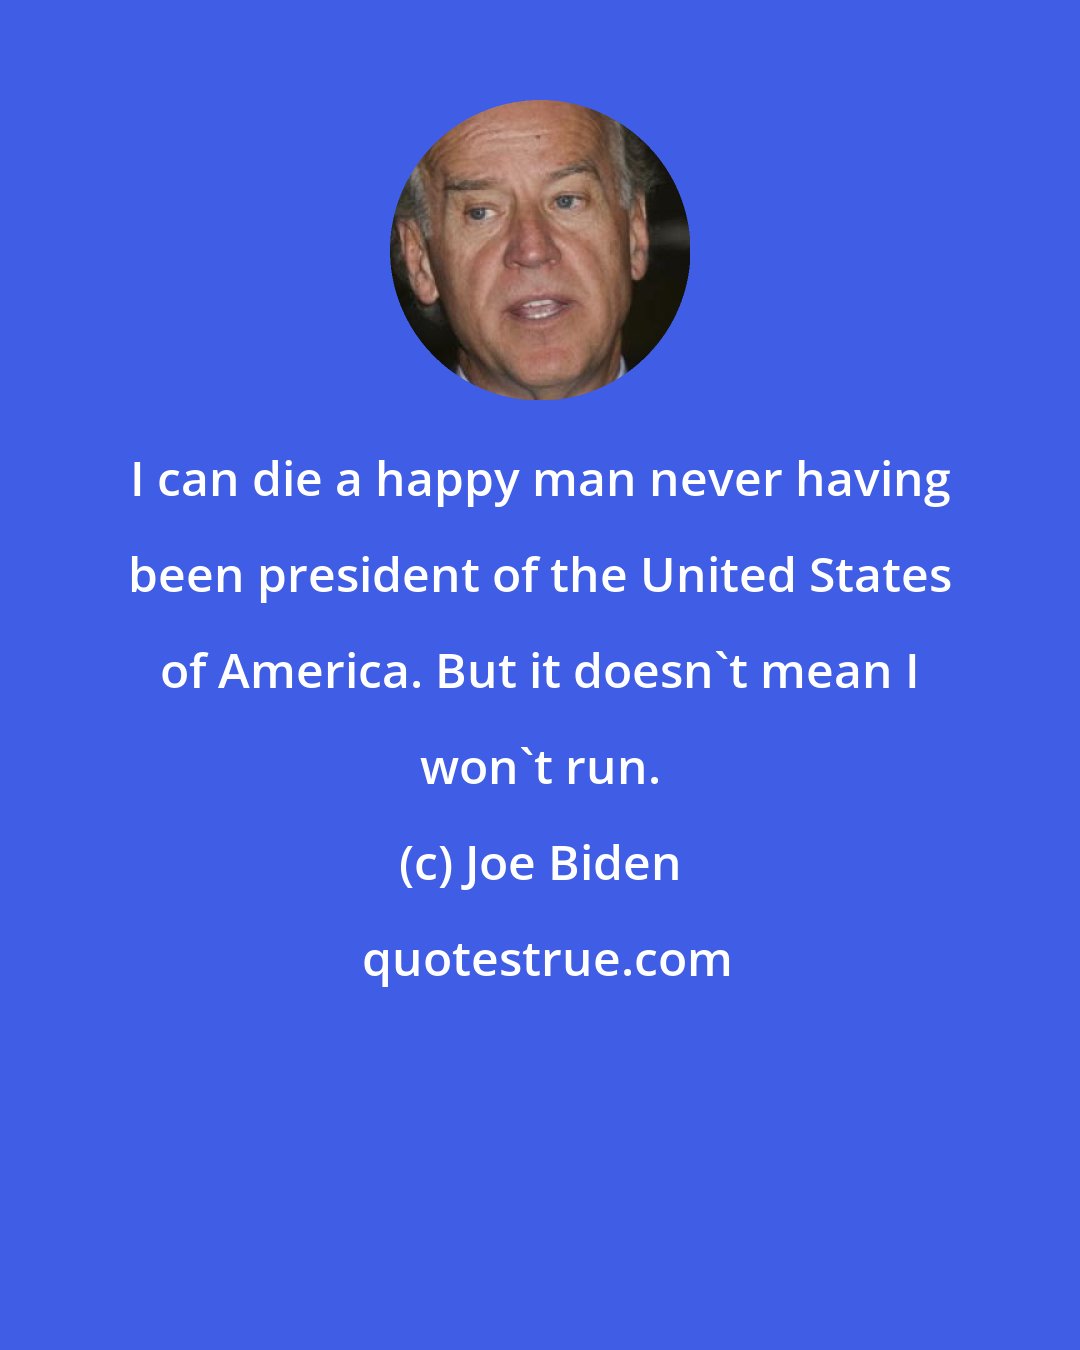 Joe Biden: I can die a happy man never having been president of the United States of America. But it doesn't mean I won't run.